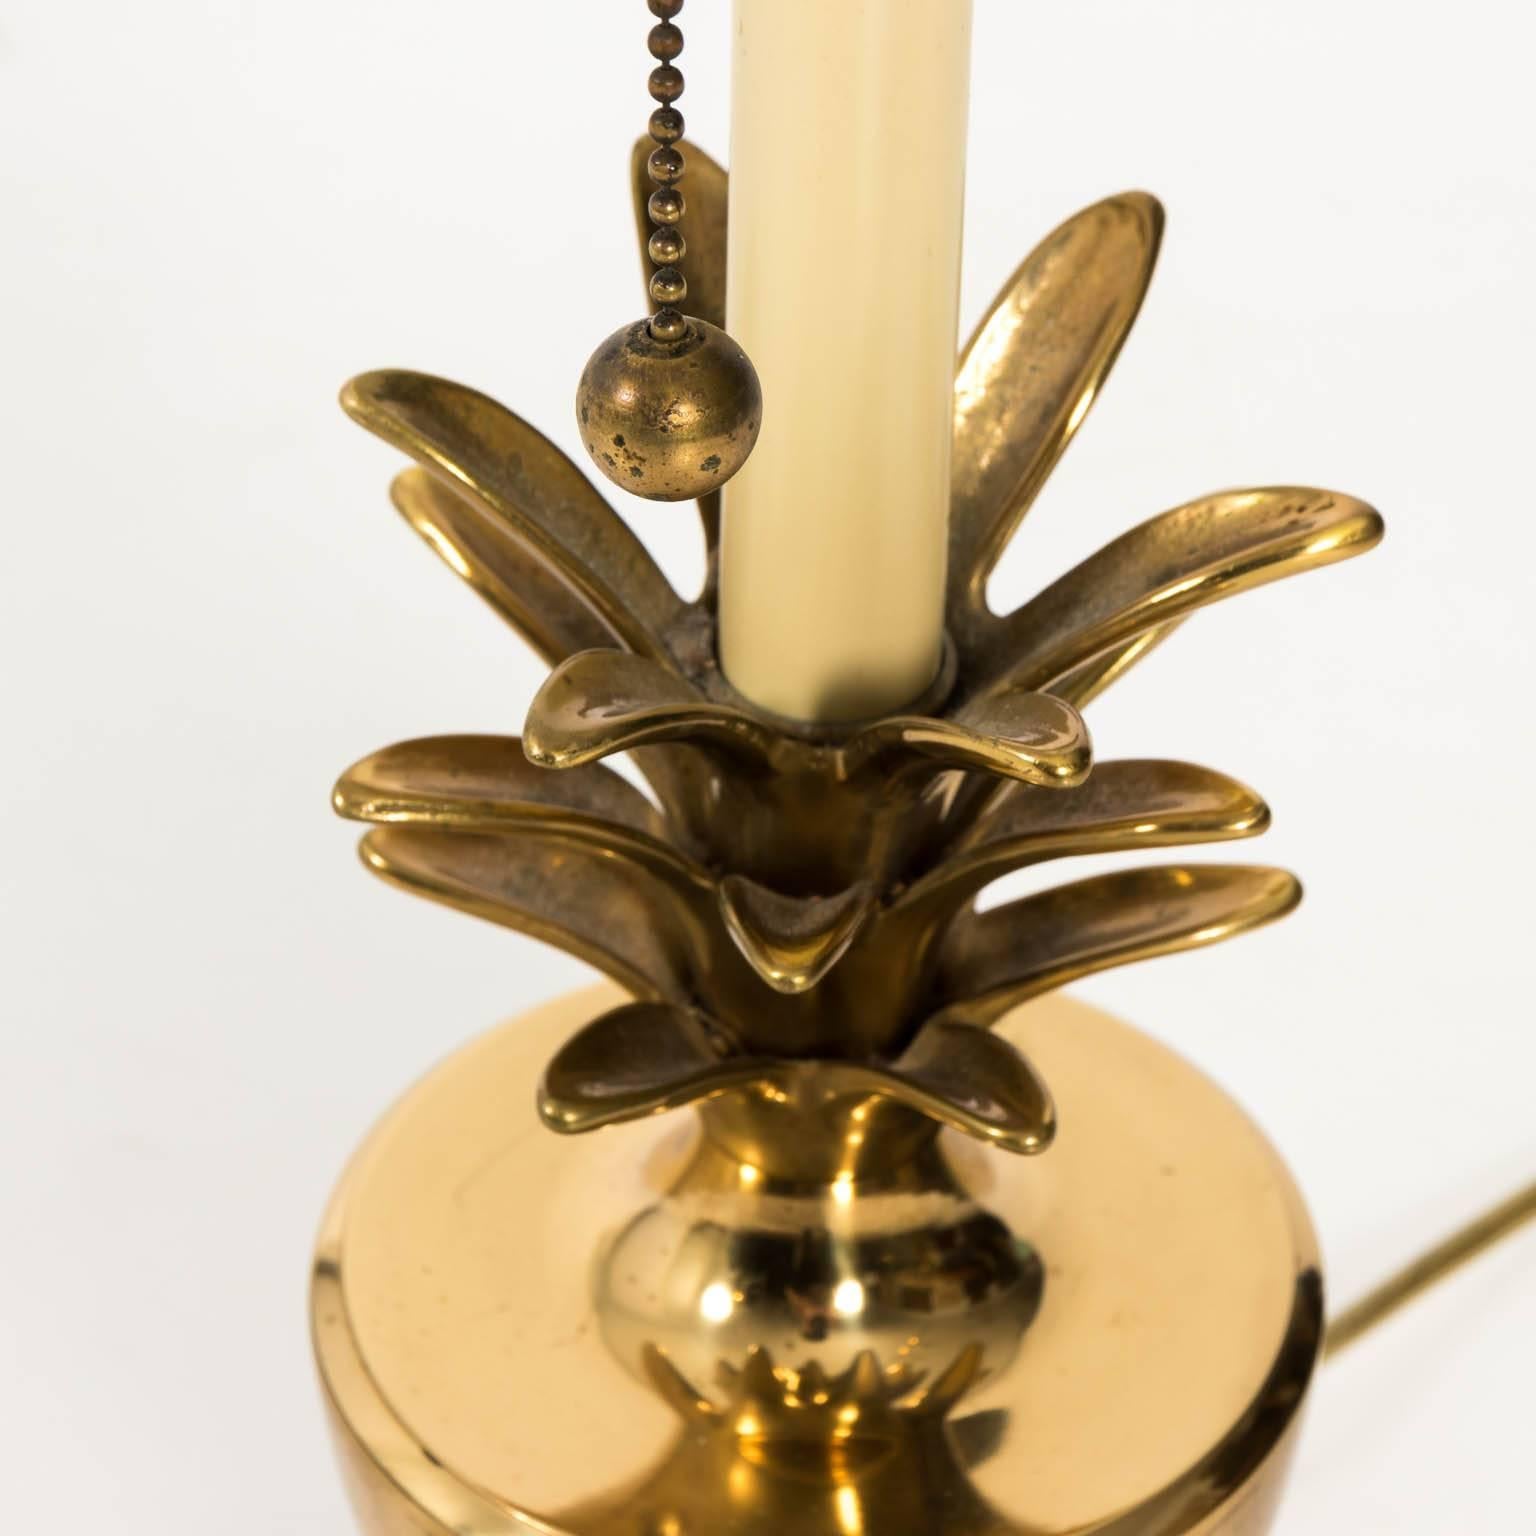 20th Century Brass Pineapple Lamp with Tole Shade